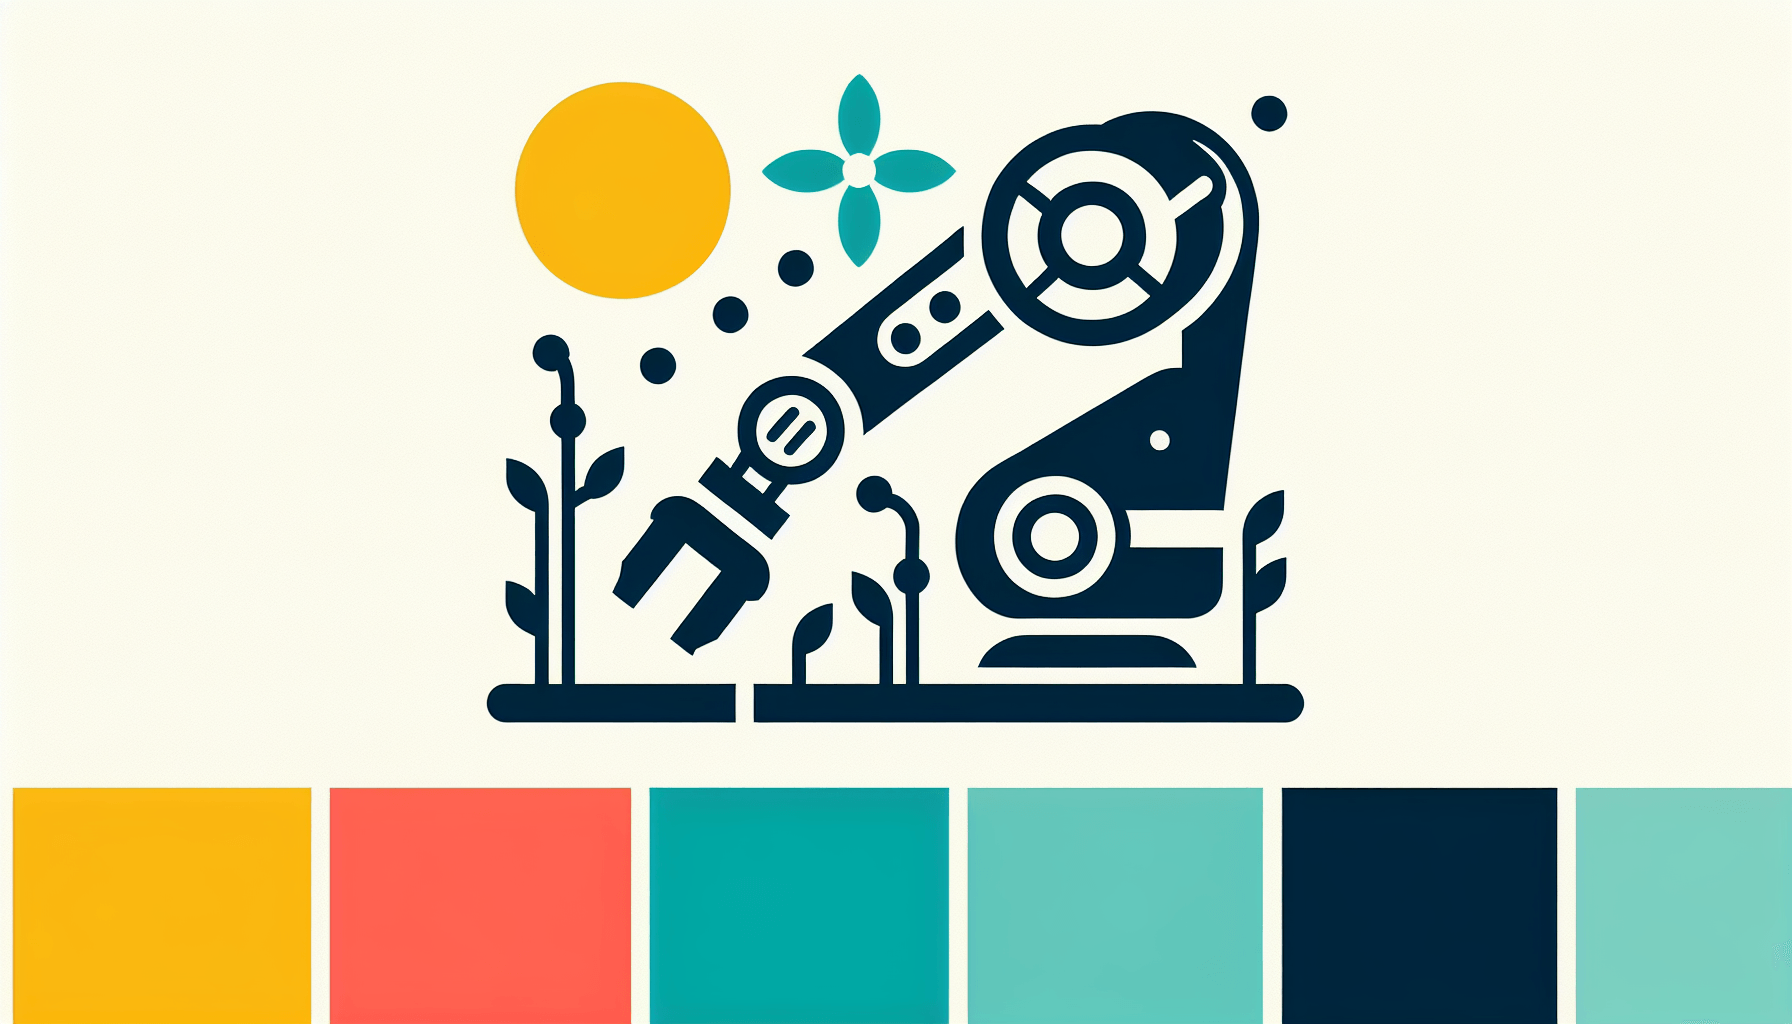 Robotics arm in flat illustration style and white background, red #f47574, green #88c7a8, yellow #fcc44b, and blue #645bc8 colors.